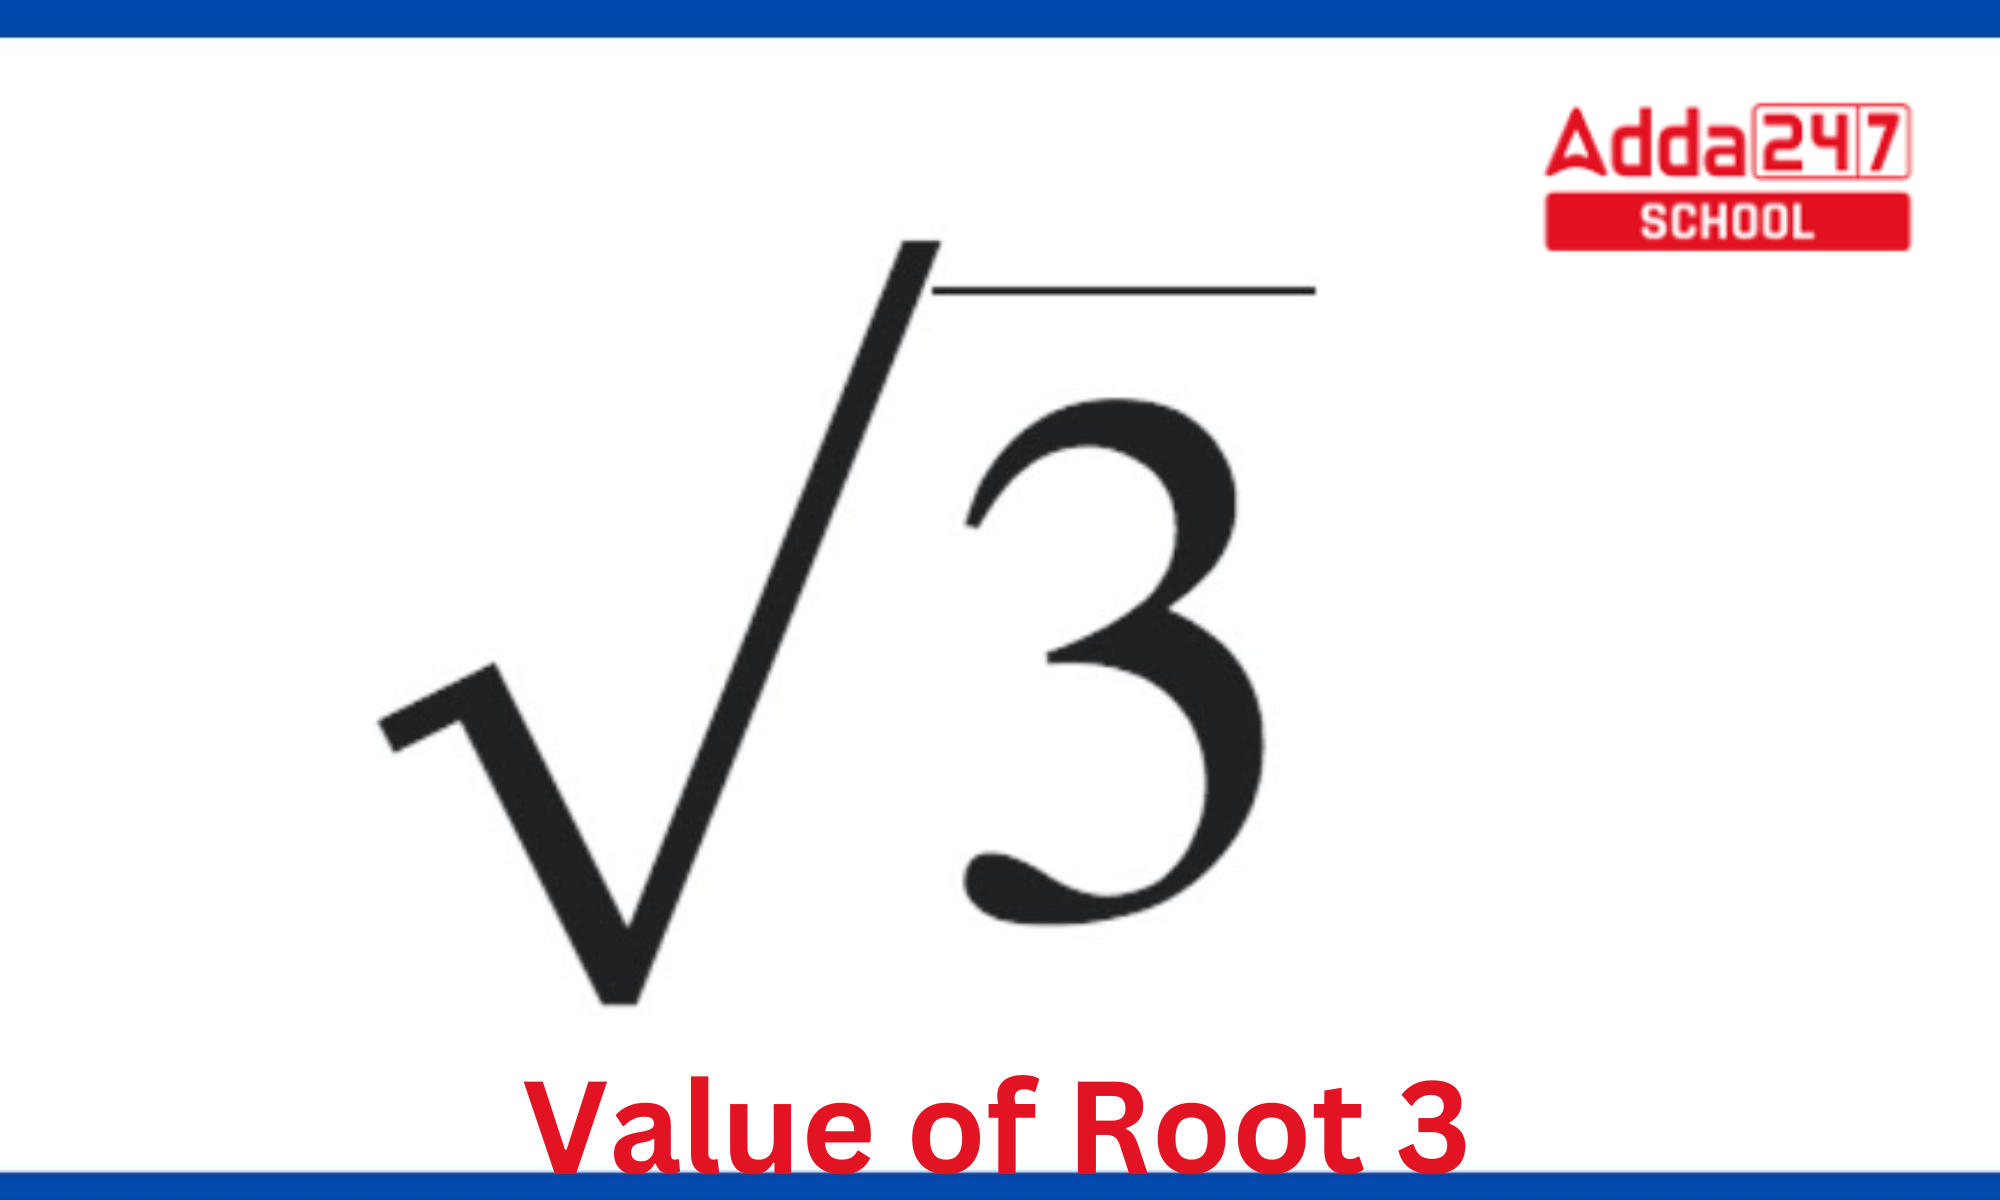 Value of Root 3